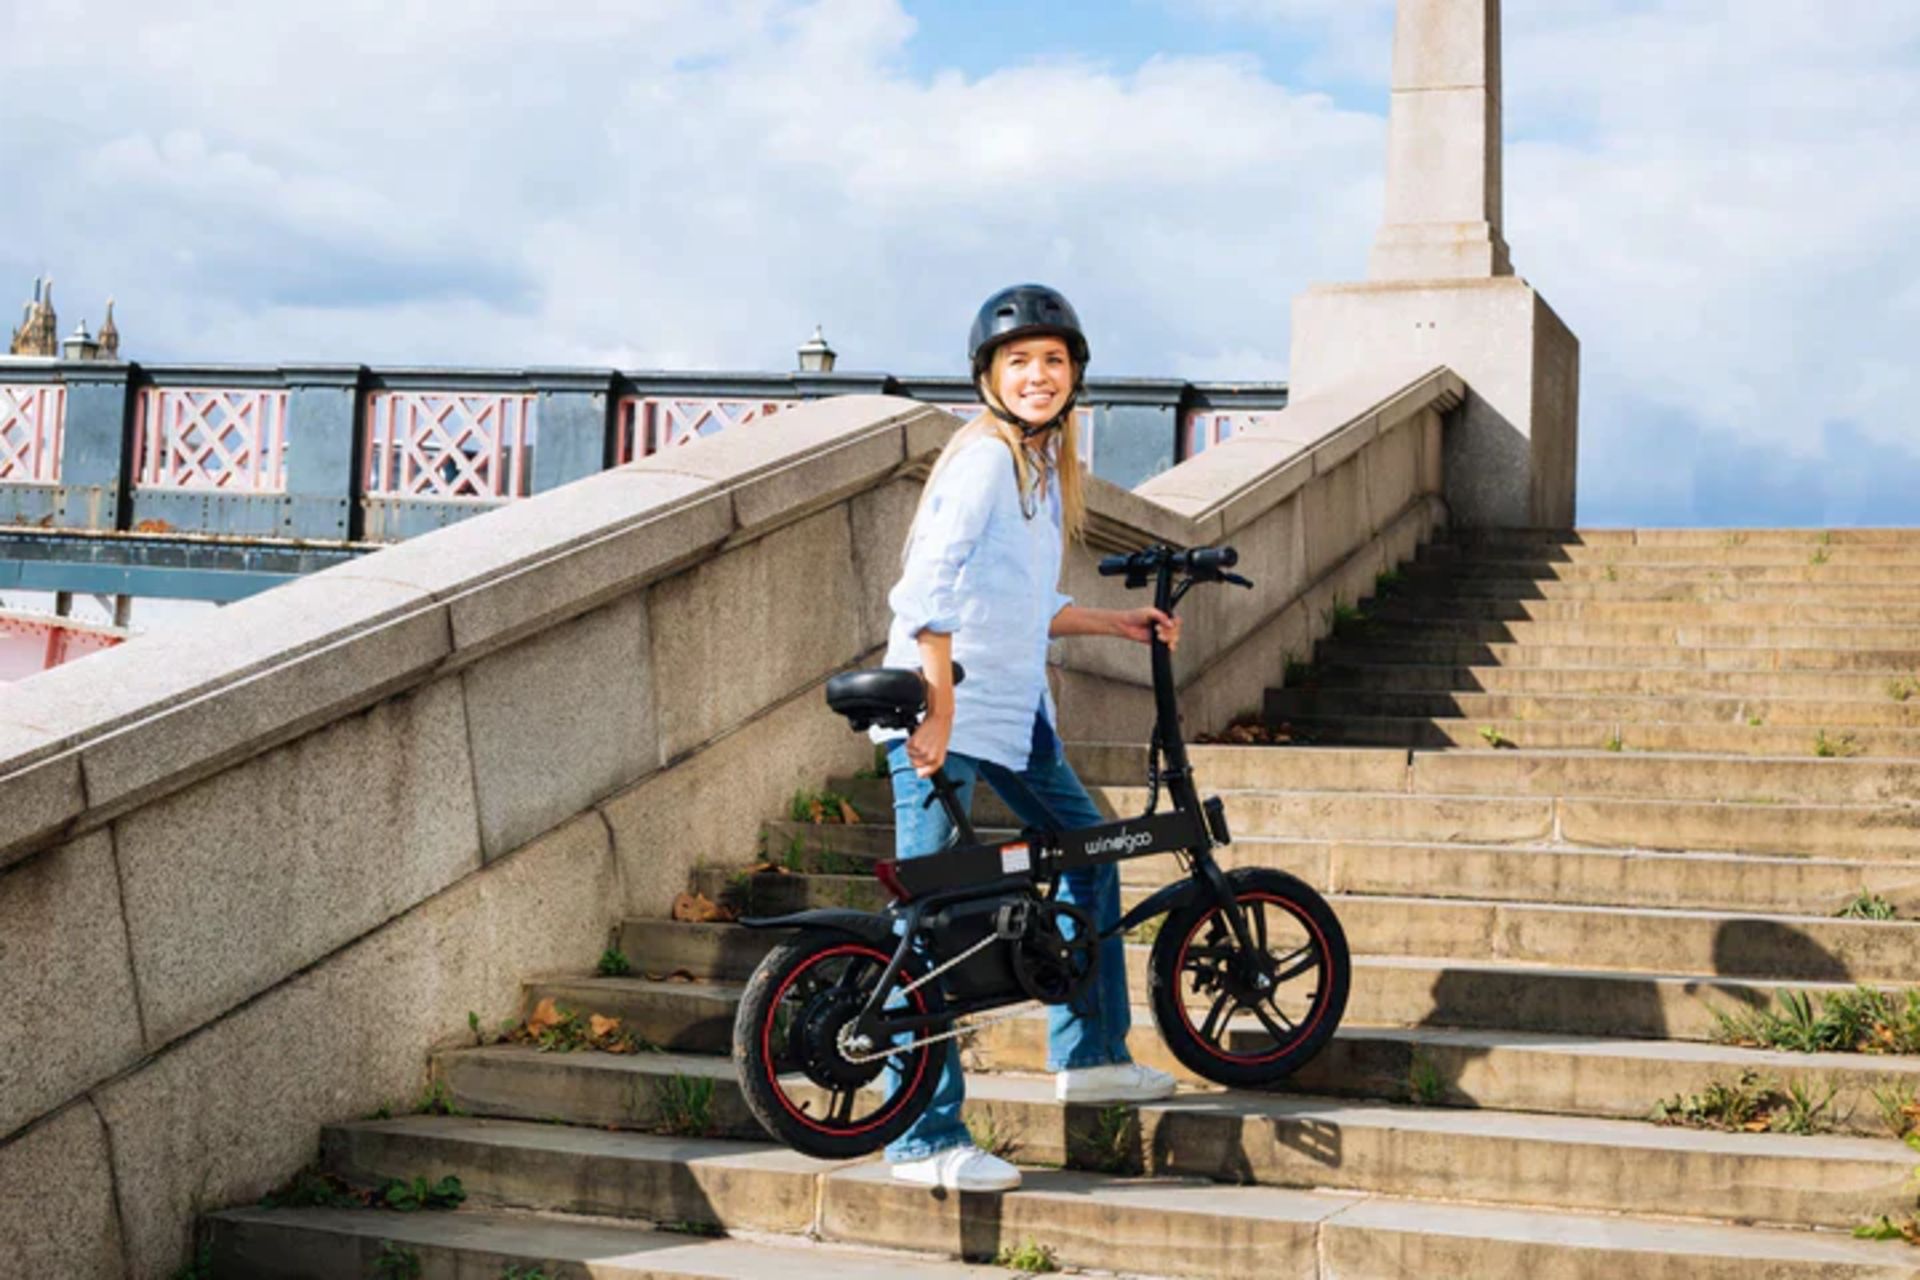 5 X Windgoo B20 Pro Electric Bike. RRP £1,100.99. With 16-inch-wide tires and a frame of upgraded - Image 3 of 7